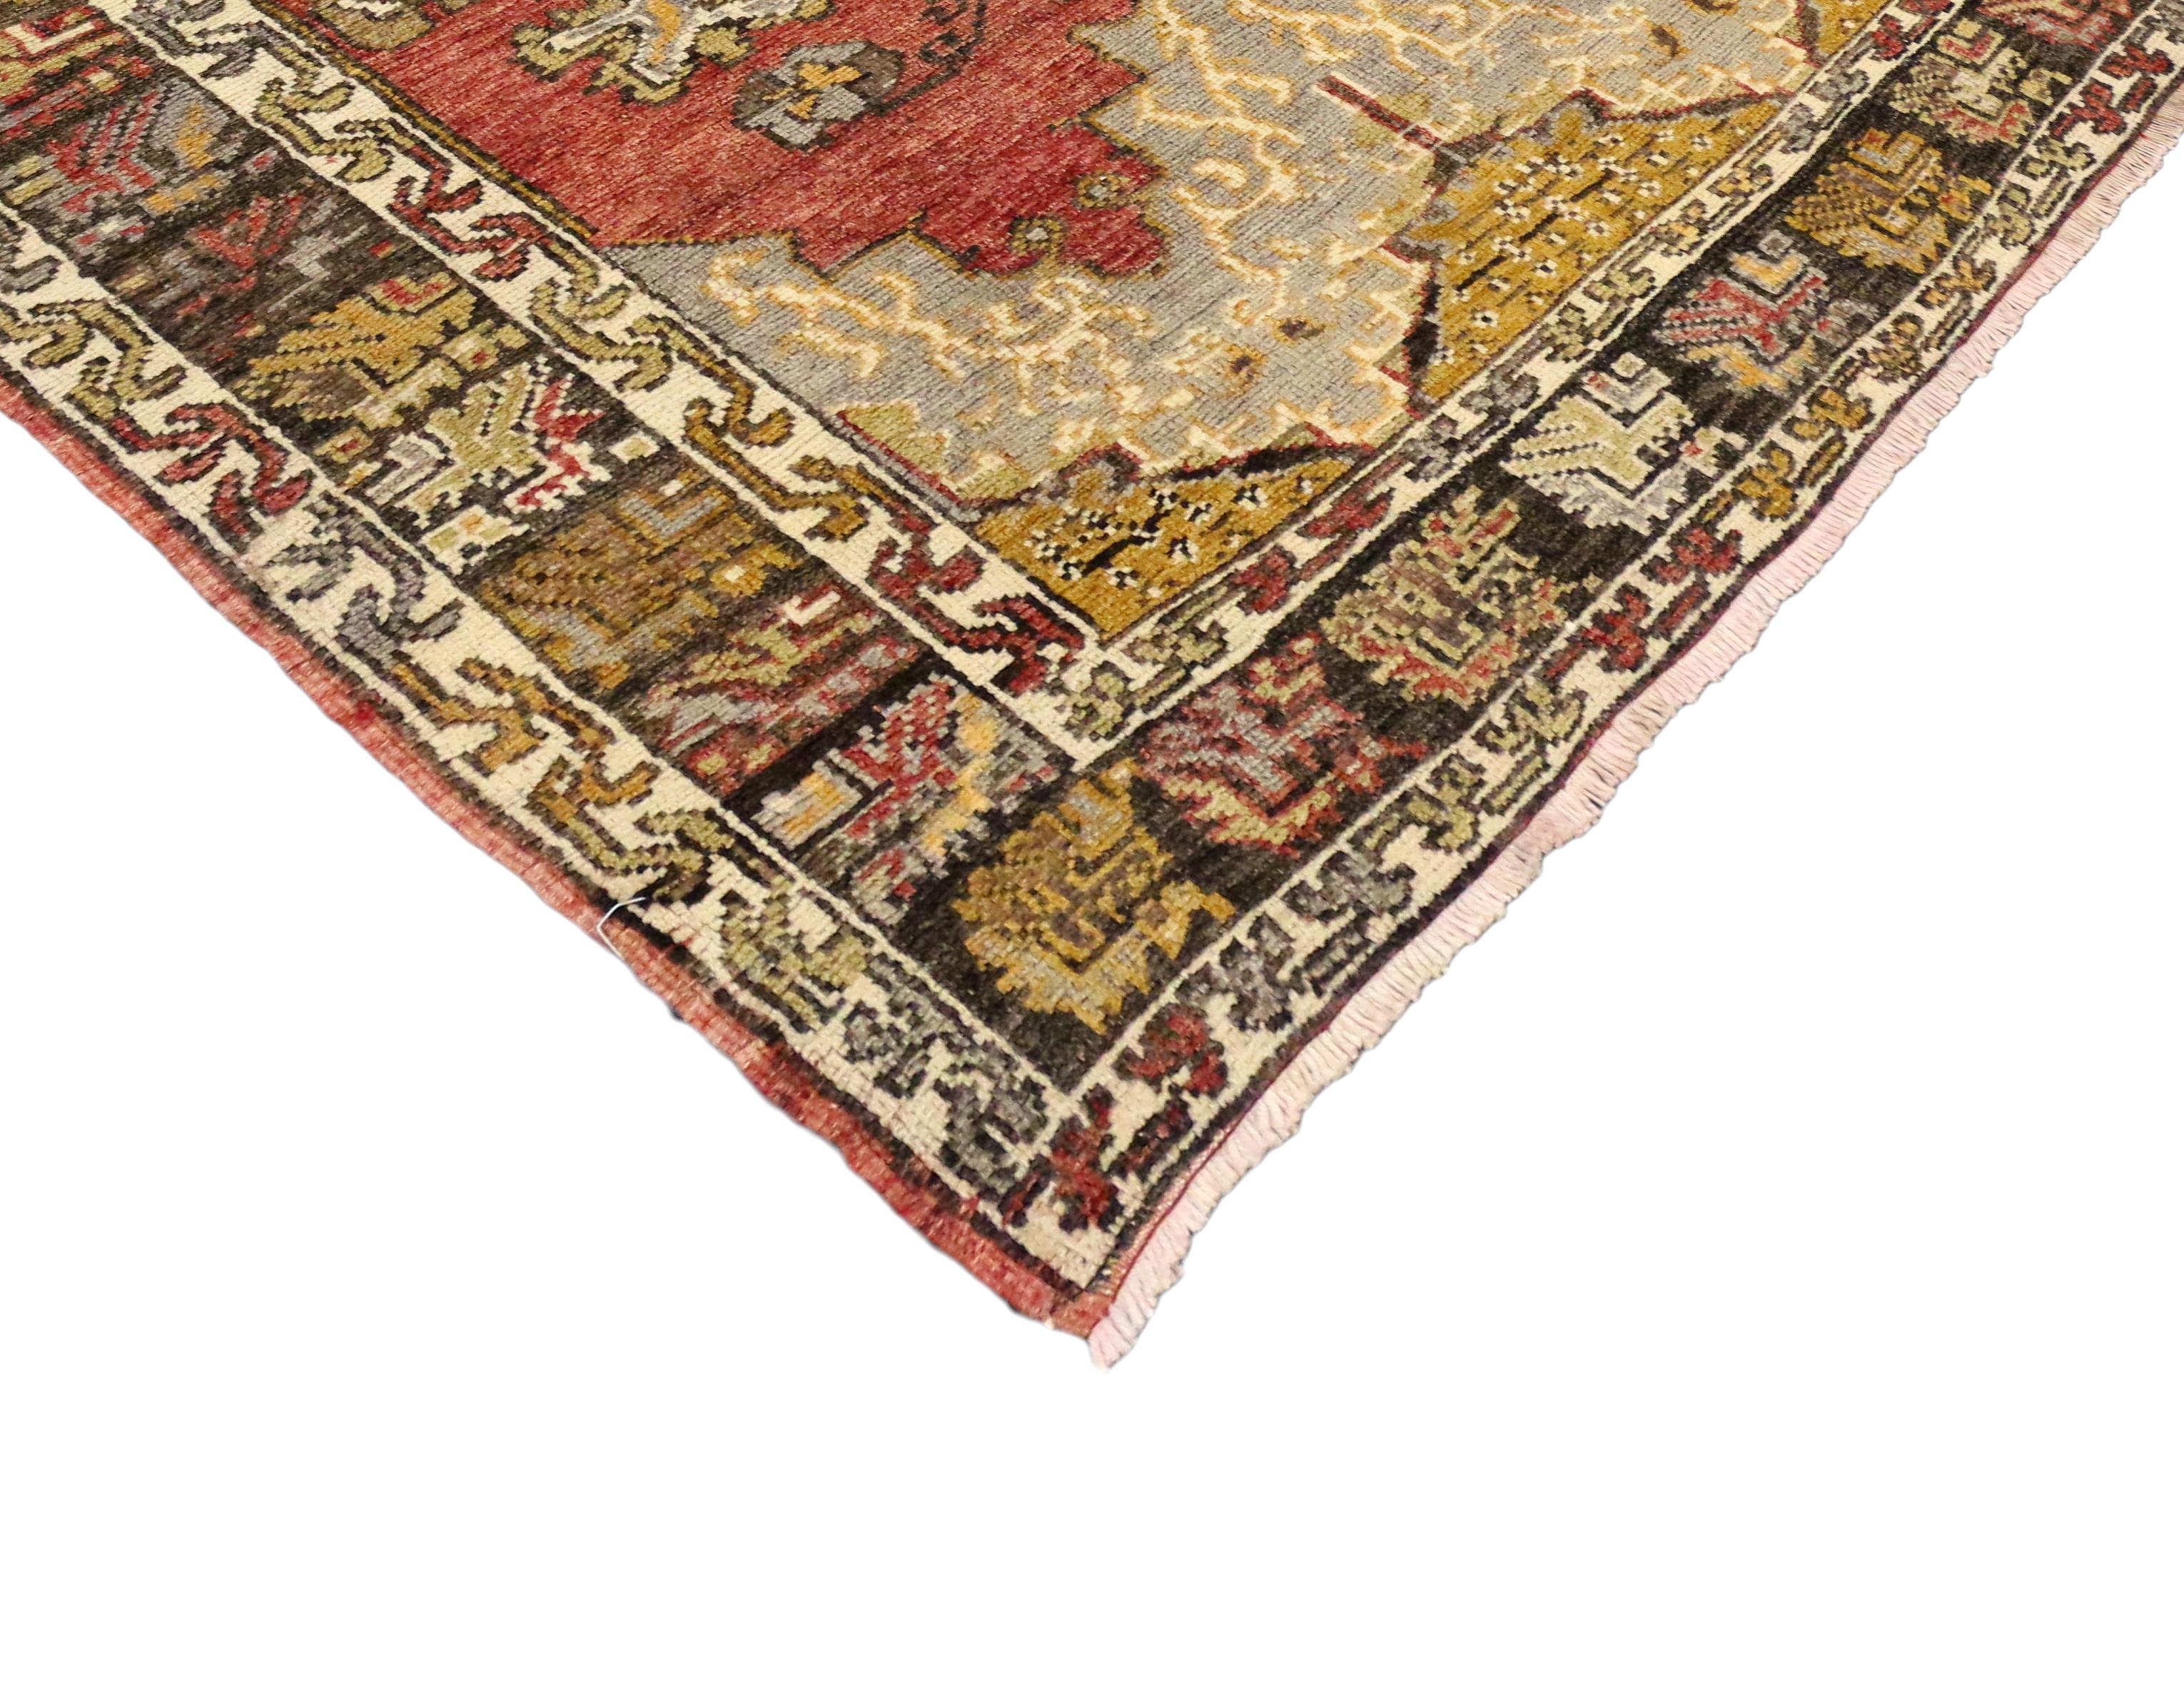 50194 Vintage Turkish Oushak Accent Rug, Entry or Foyer Rug 04'00 x 05'11. This hand-knotted wool vintage Turkish Oushak rug features a modern traditional style. Immersed in Anatolian history and refined colors, this vintage Oushak rug combines